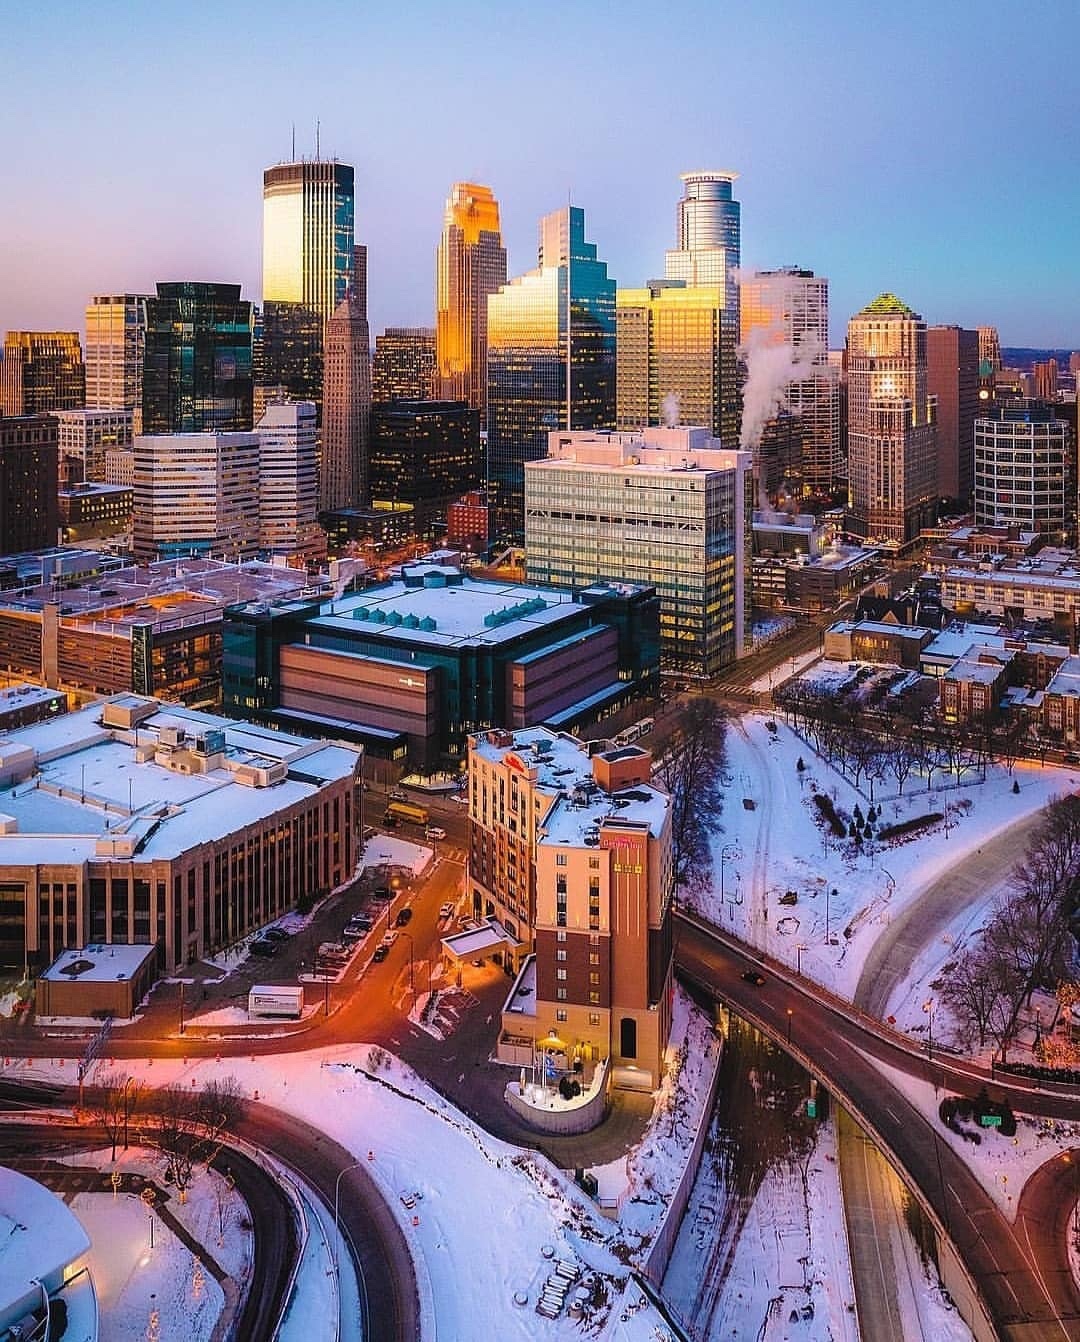 Tall buildings at night in Downtown Minneapolis during winter. Photo by Instagram user @travelmoretwincities